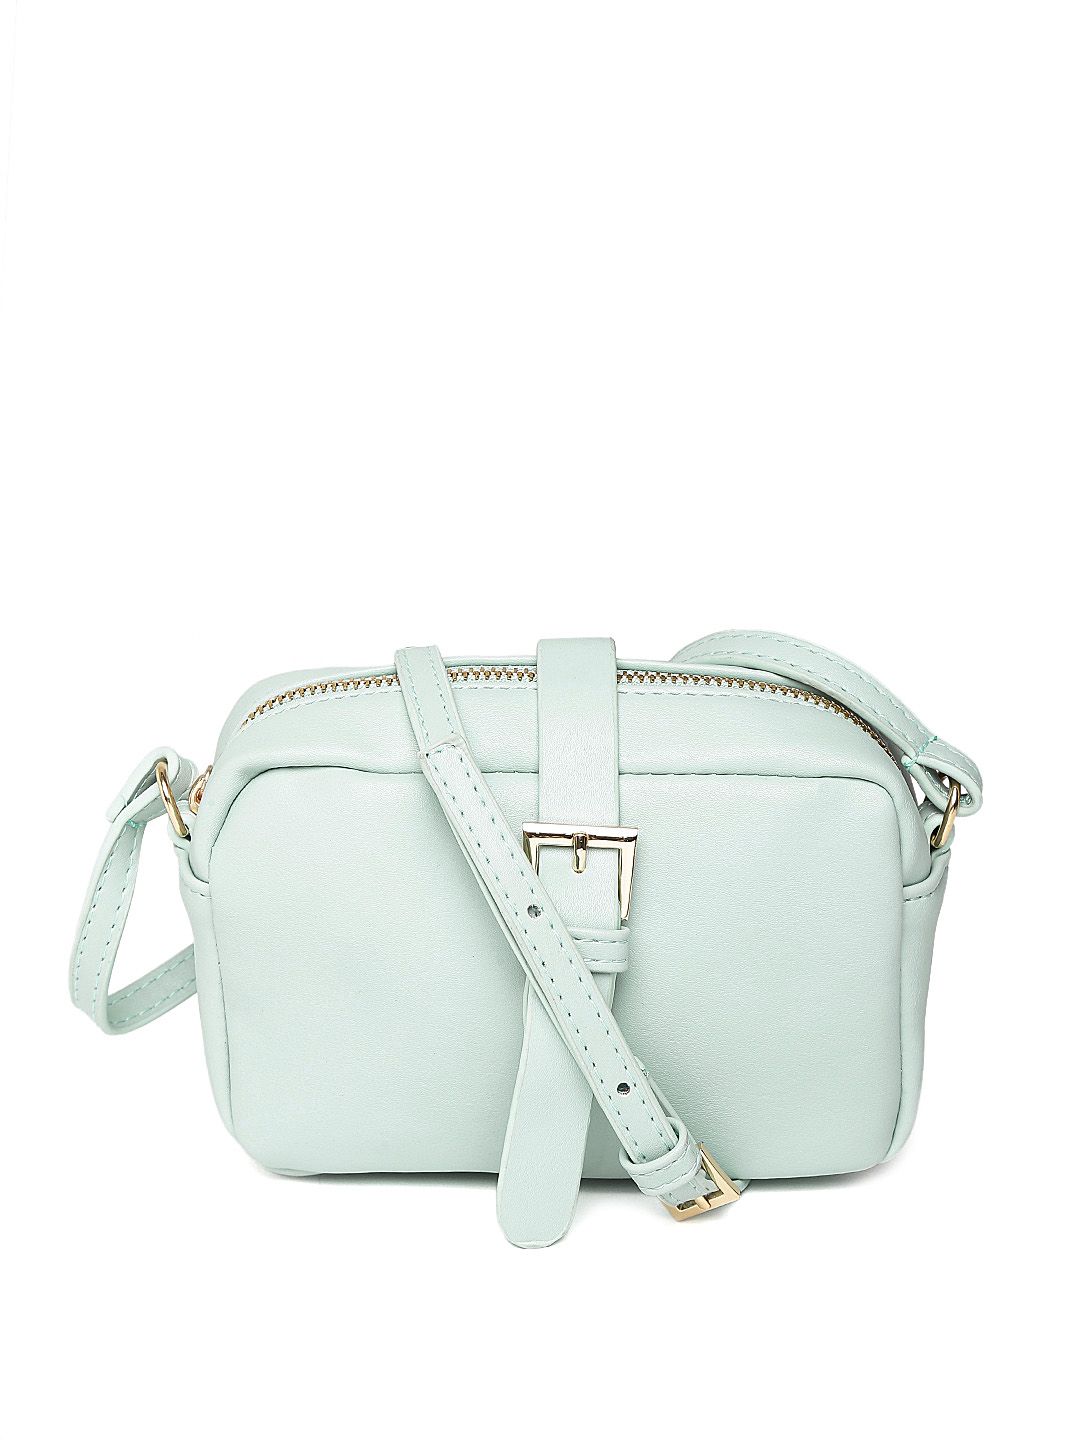 DressBerry Mint Green Sling Bag Price in India